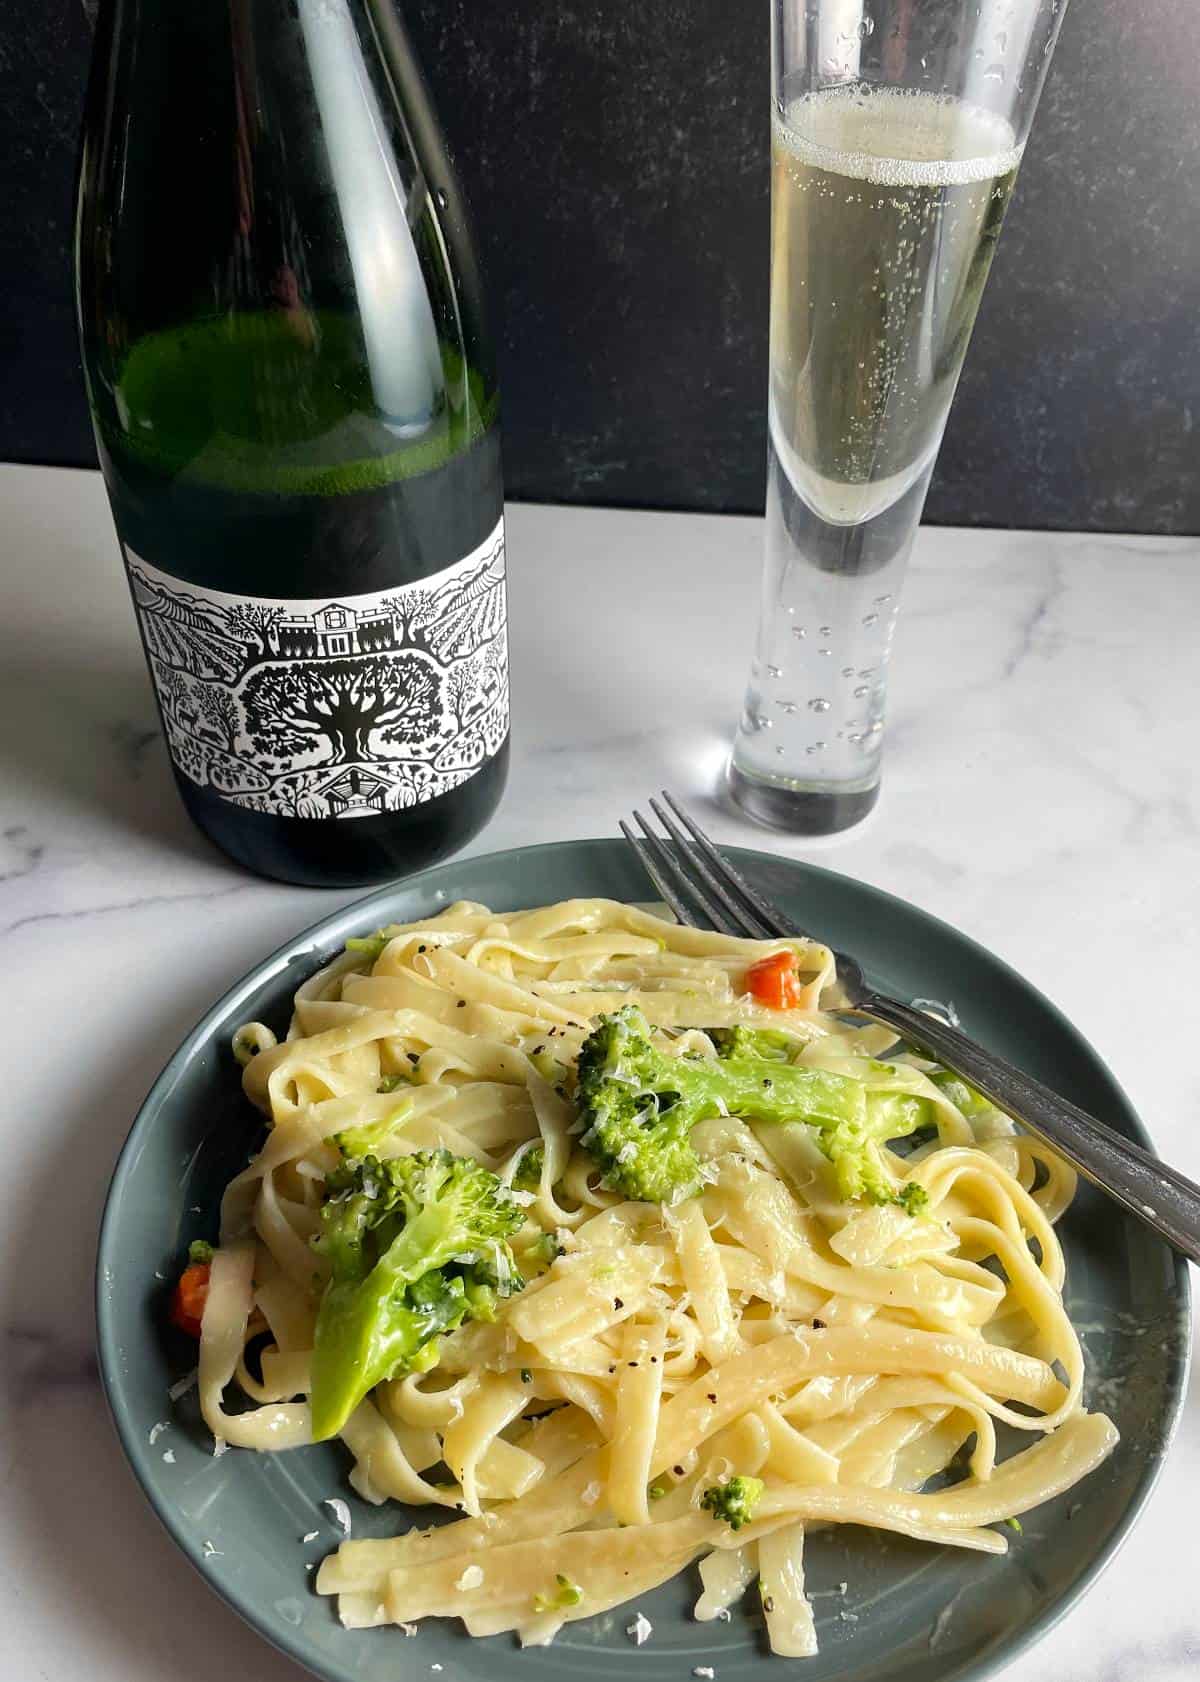 plate of fettccuine primavera served with a bottle and glass of sparkling Picpoul wine.